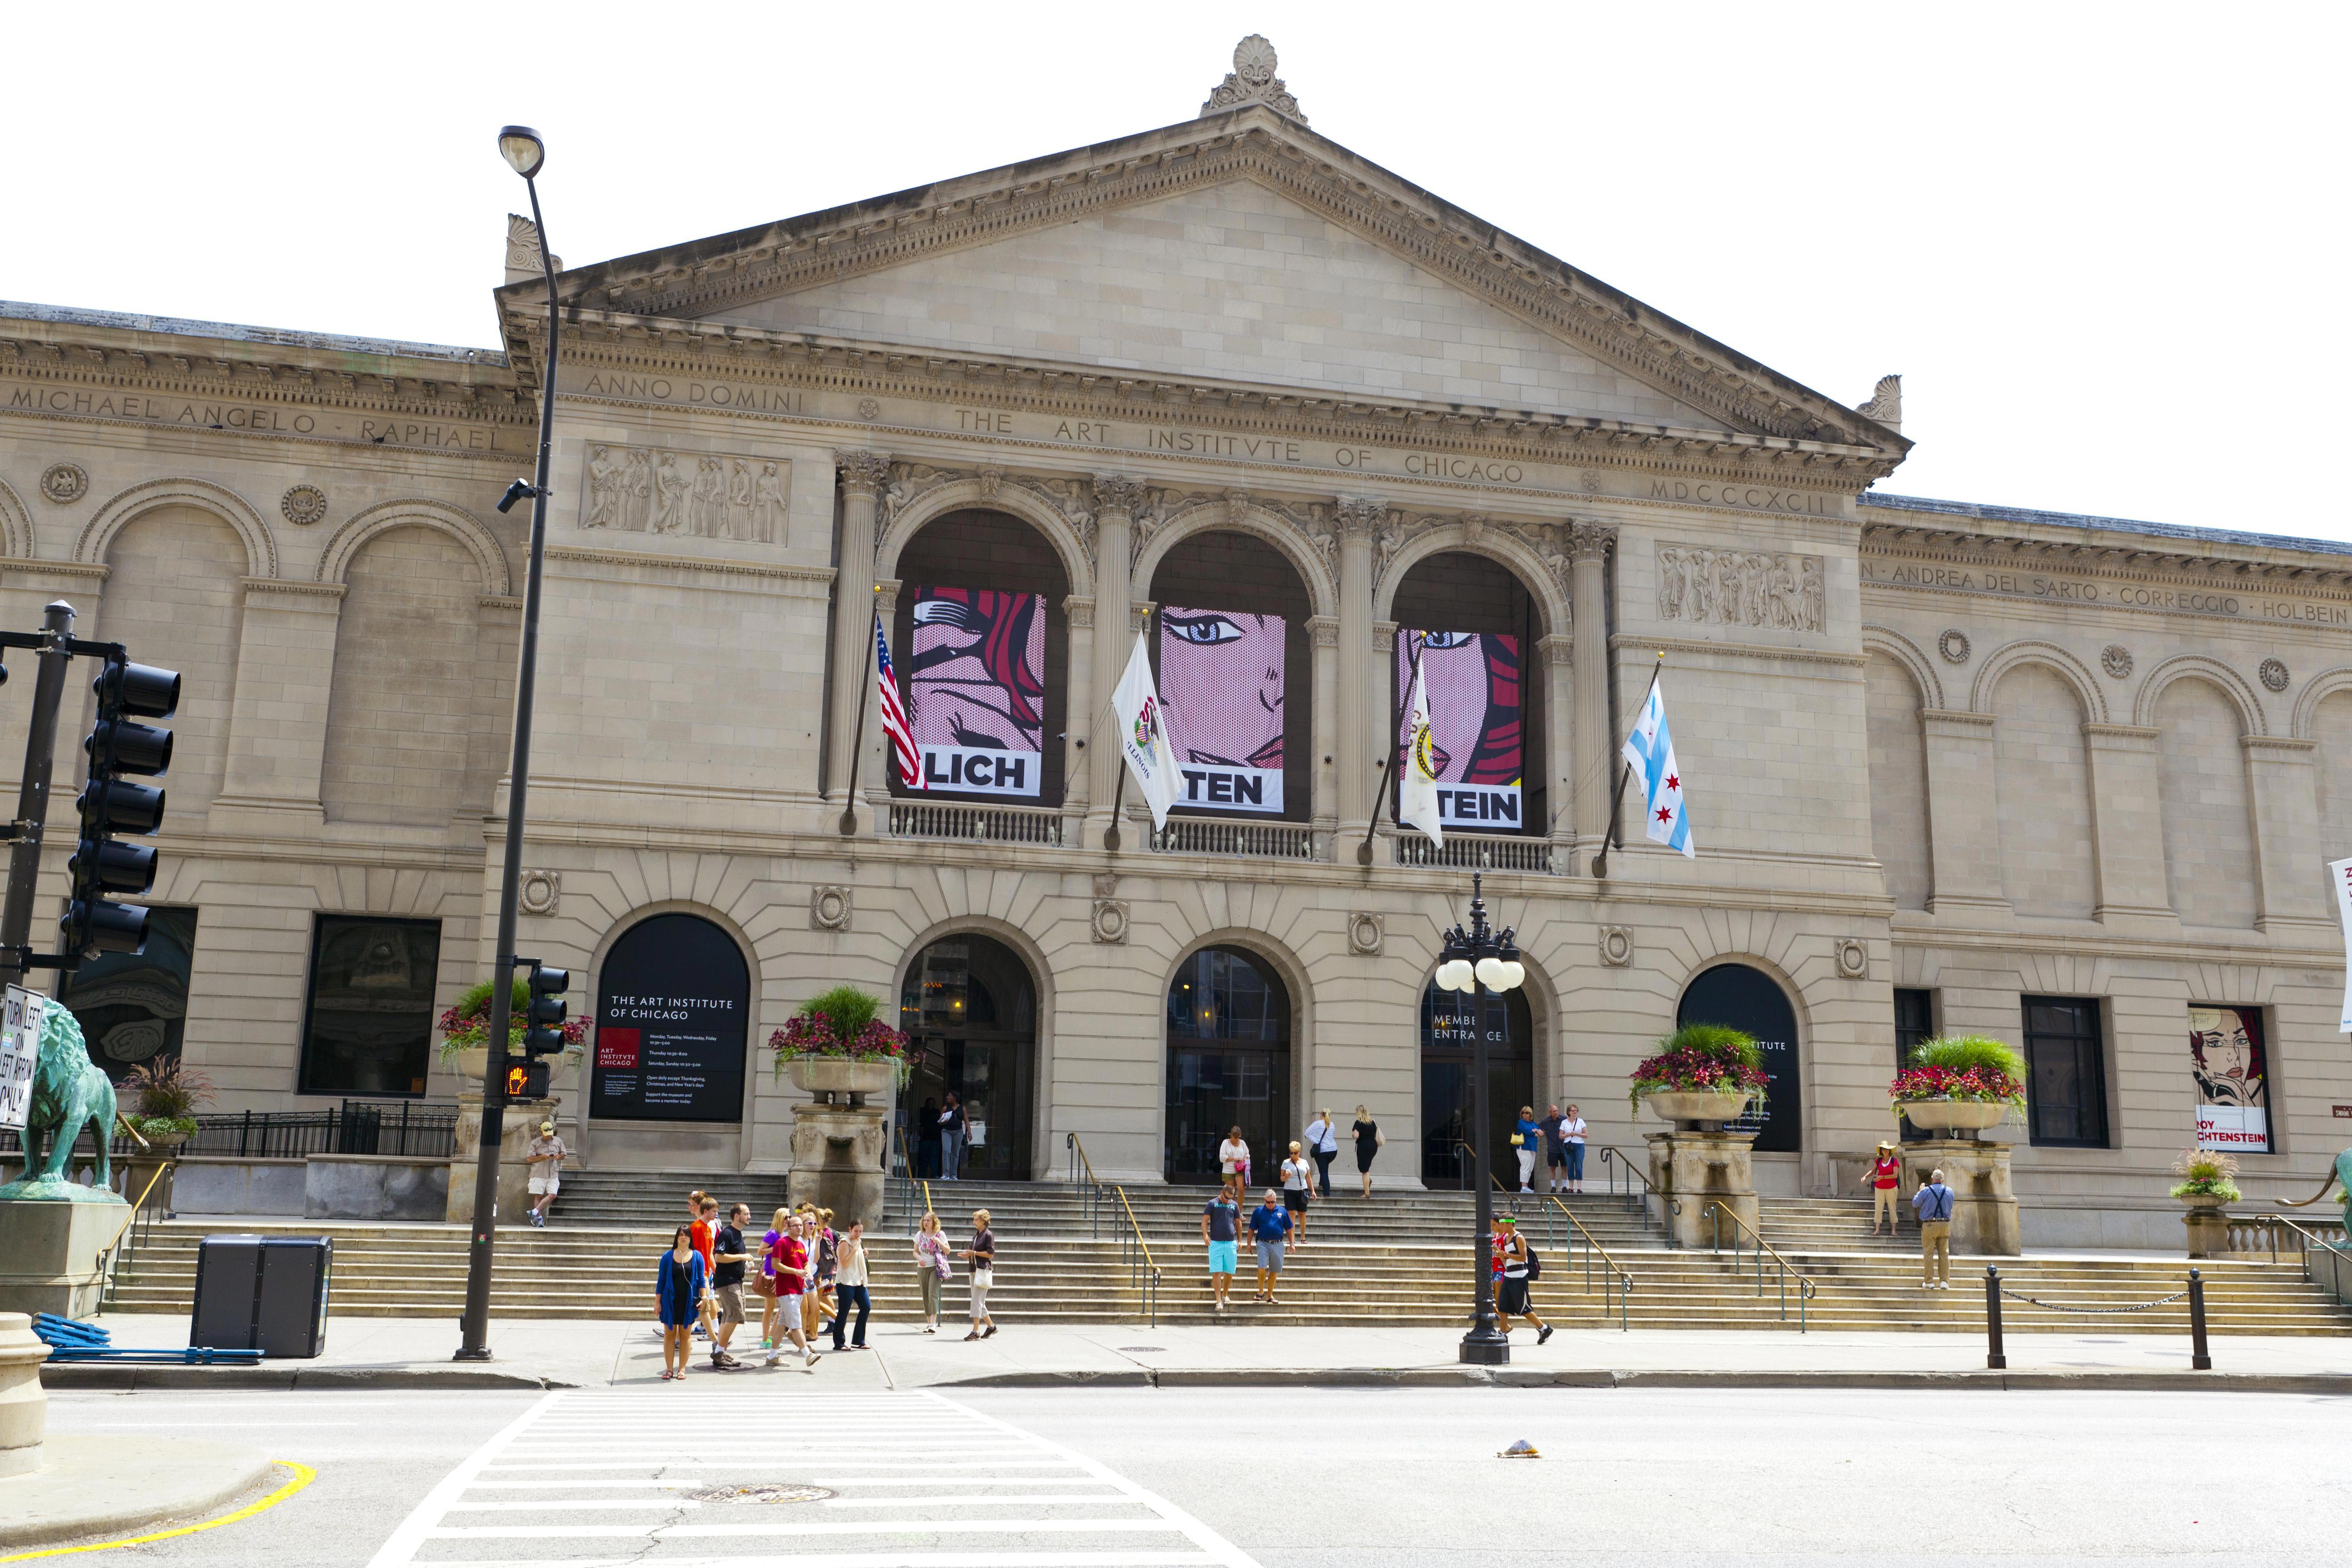 About Art Institute of Chicago - All you need to know before visiting